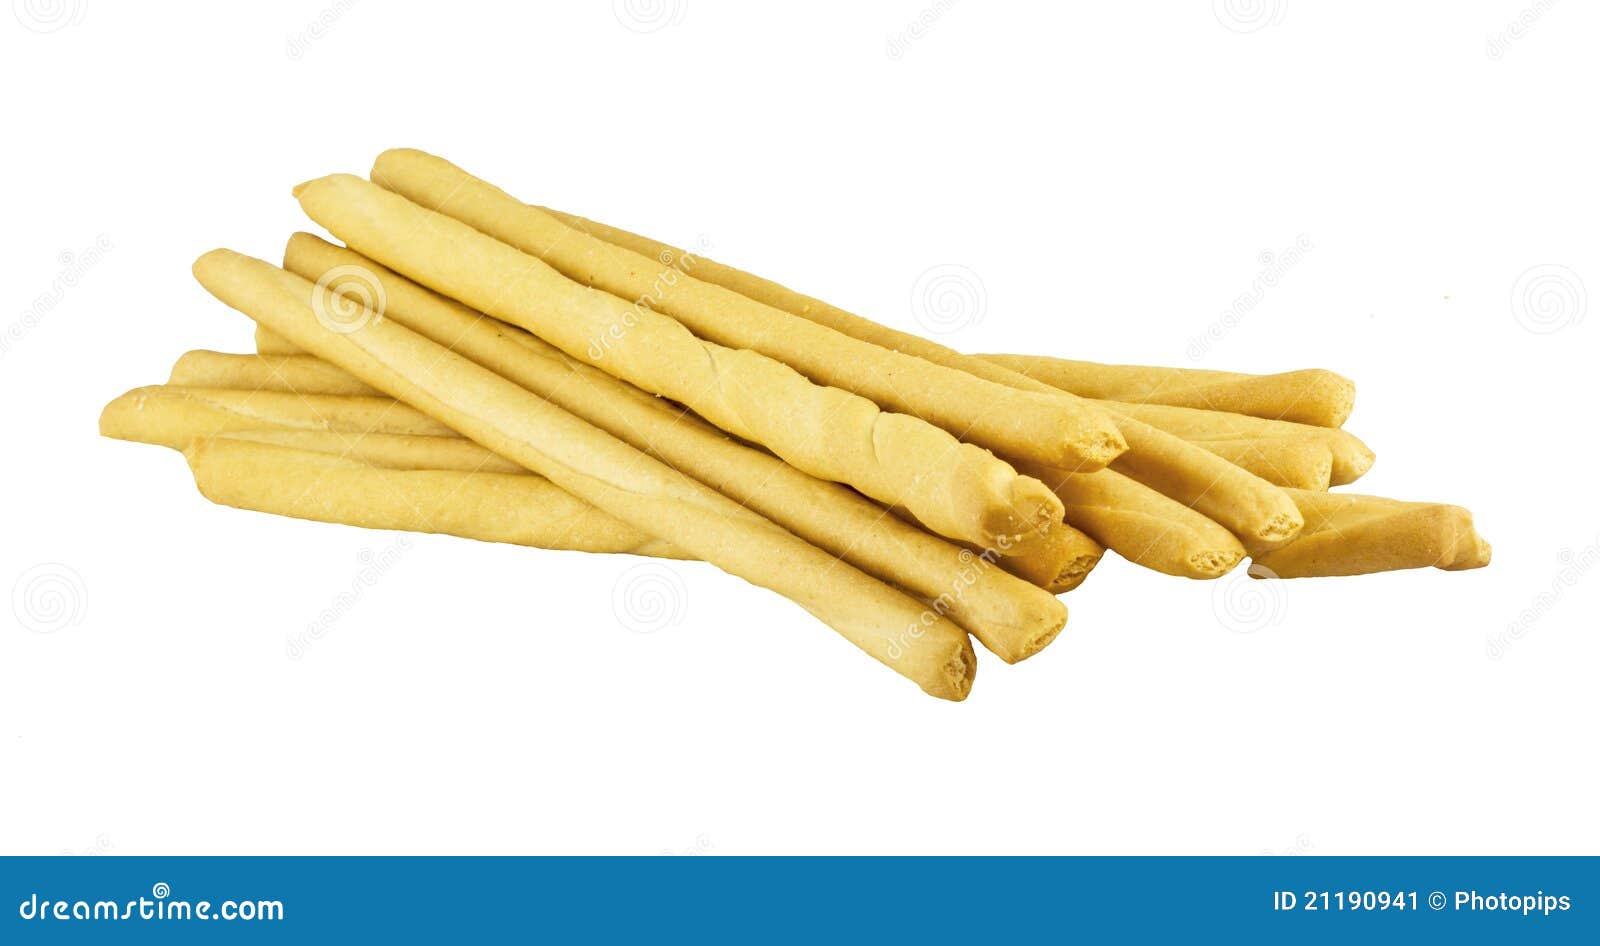 Bread sticks stock image. Image of energy, bread, meal - 21190941